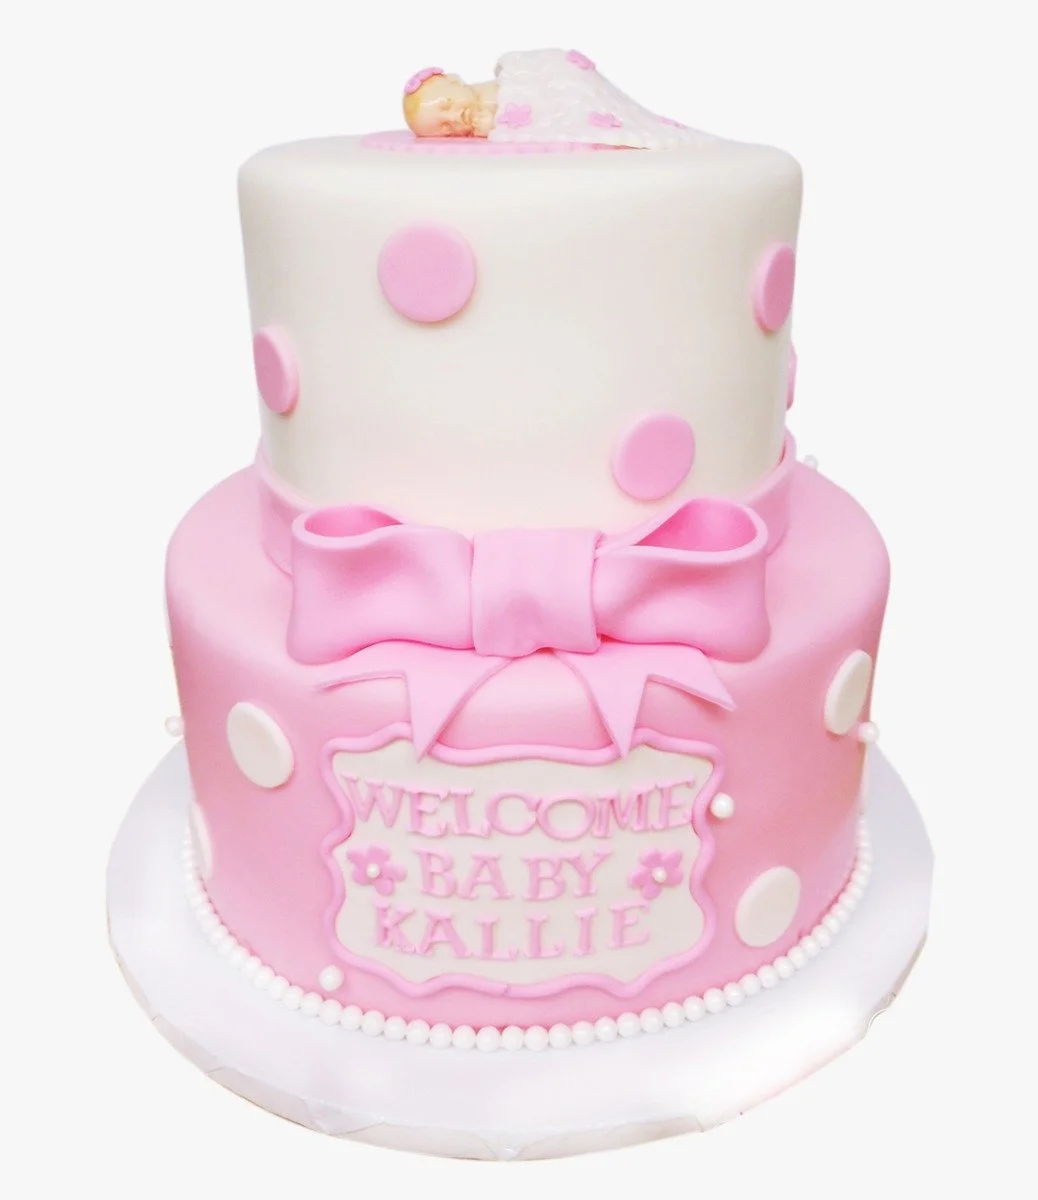 3D Tiered Customized Baby Girl Cake by Sugar Sprinkles 